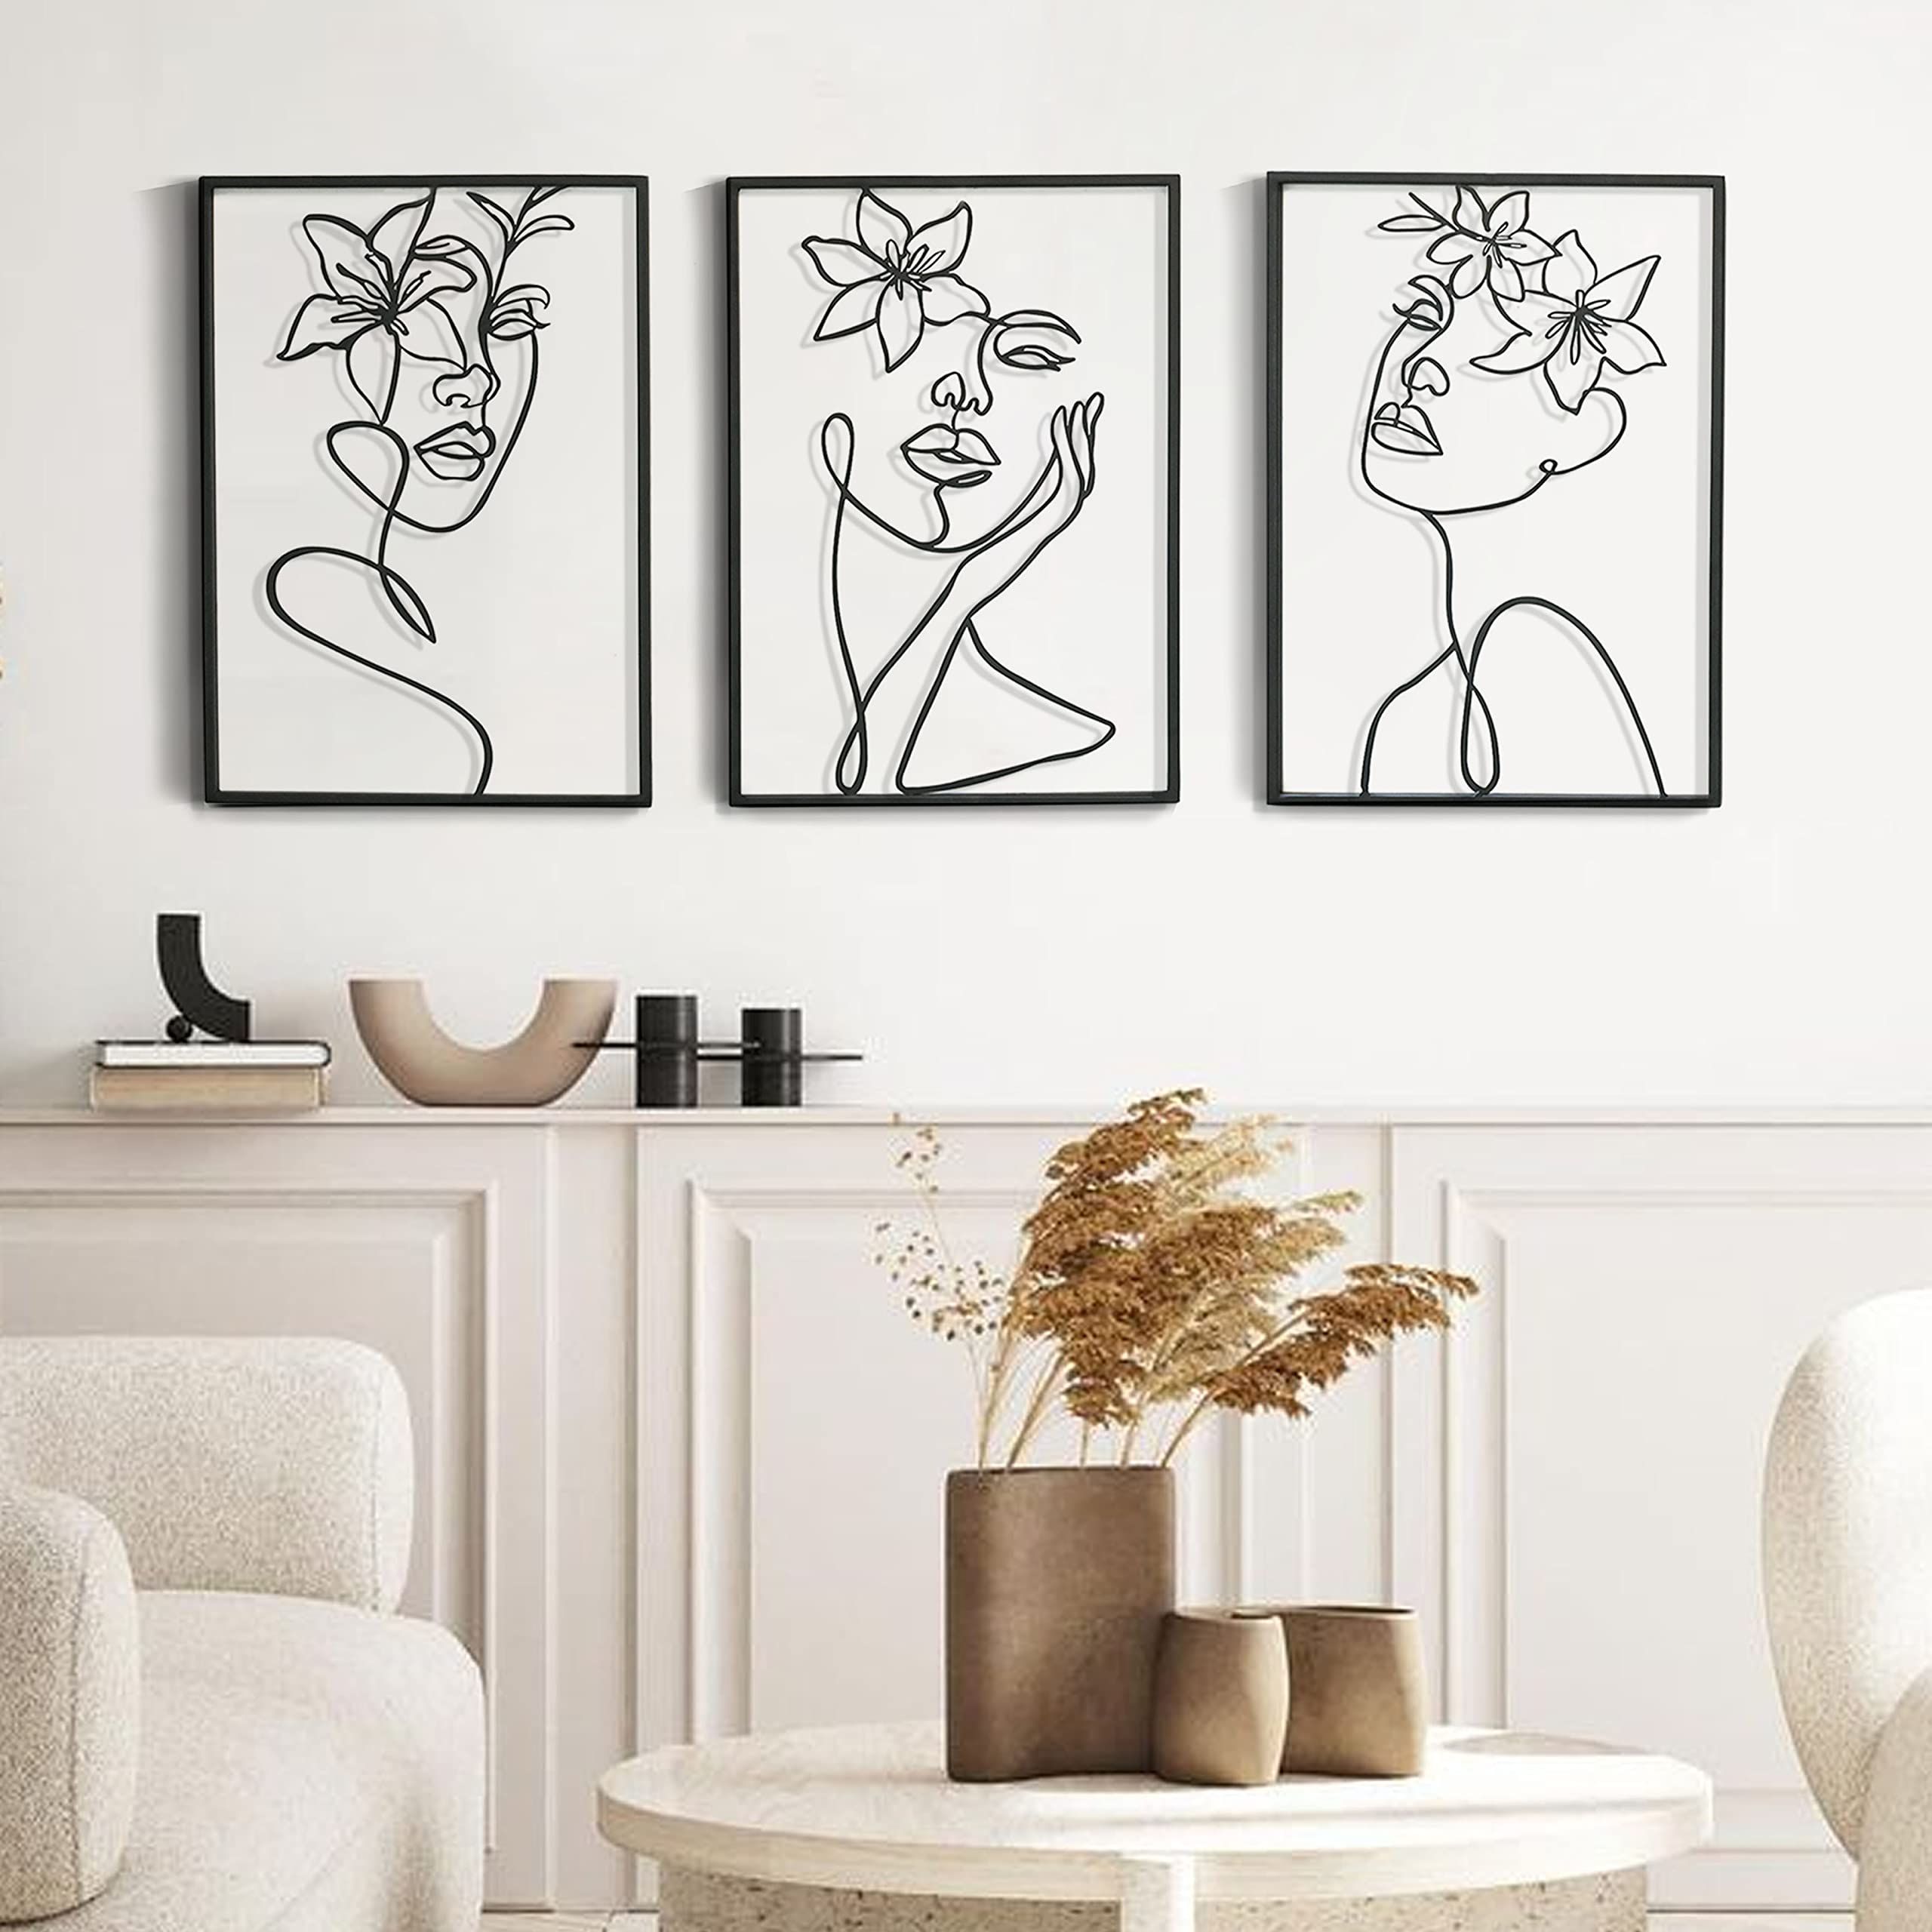 Best And Newest Amazon: Remenna Minimalist Decor Aesthetic Wall Art Decor Modern  Abstract One Line Women Body Face Art Large Metal Wall Decor For Living  Room Bedroom Bathroom Set Of 3 (black) : Home & Inside Aesthetic Wall Art (View 2 of 15)